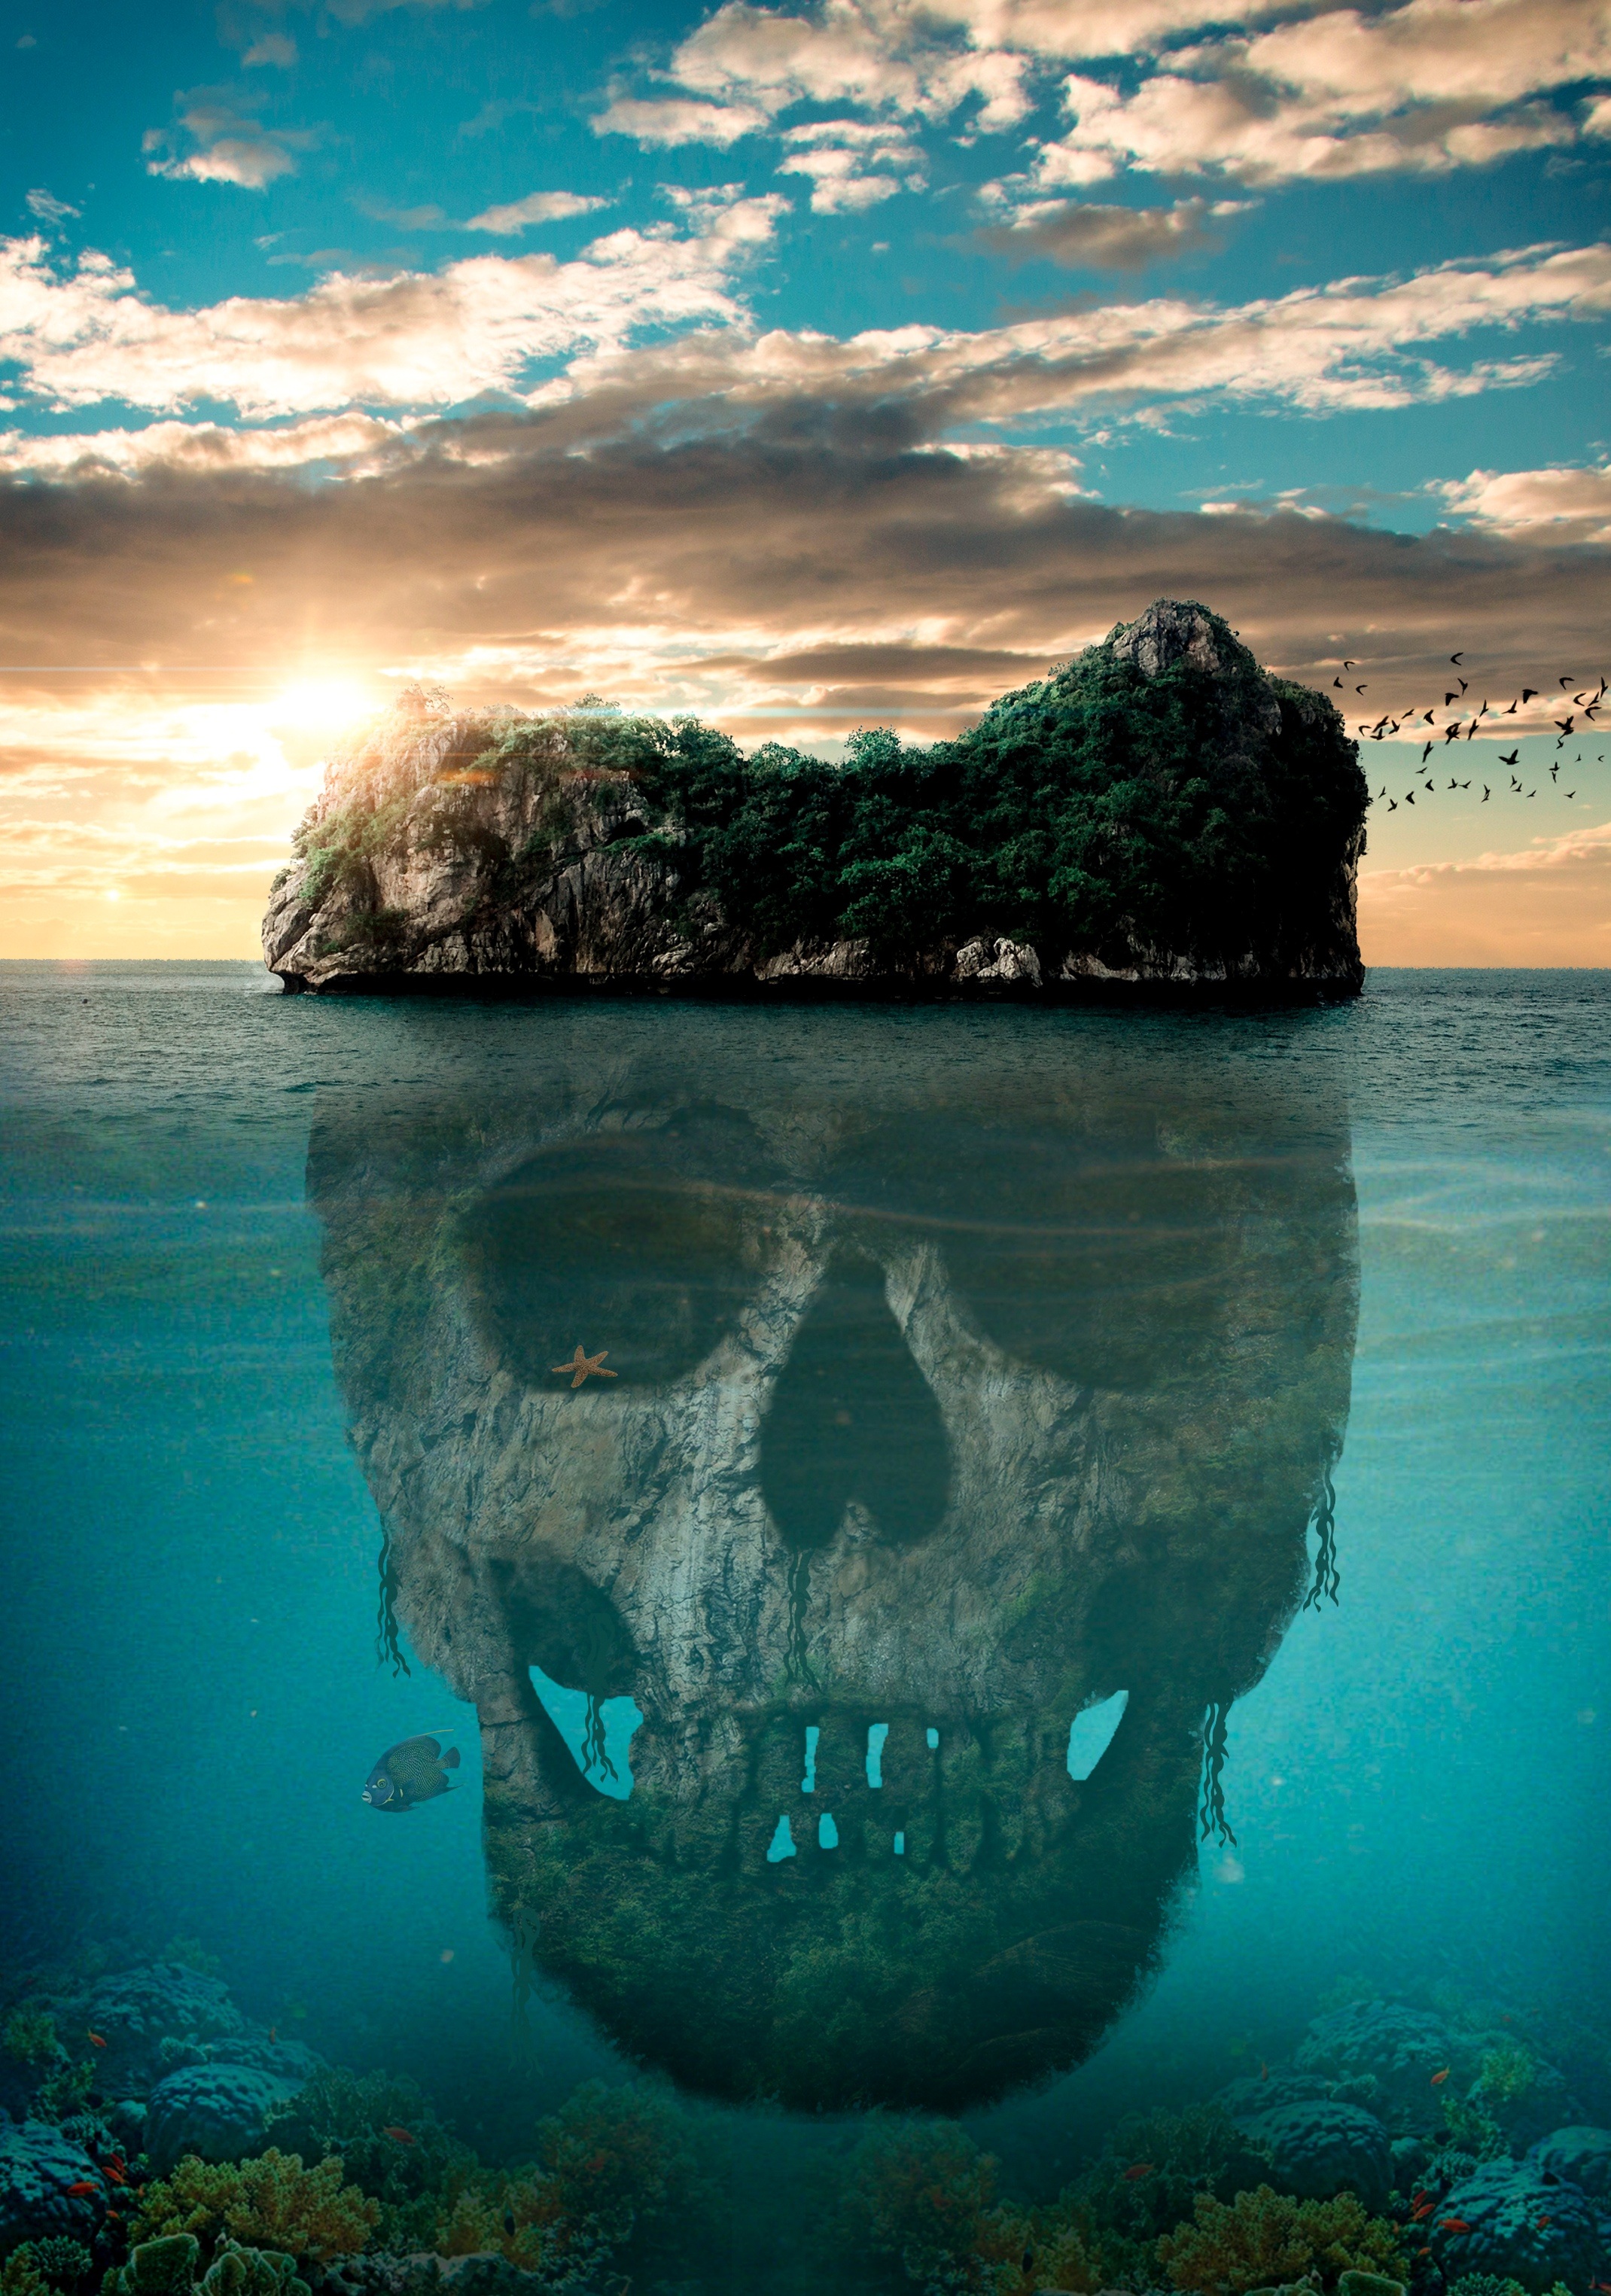 54318 download wallpaper fantasy, skull, mystic, ocean, island, mysterious, mystical screensavers and pictures for free